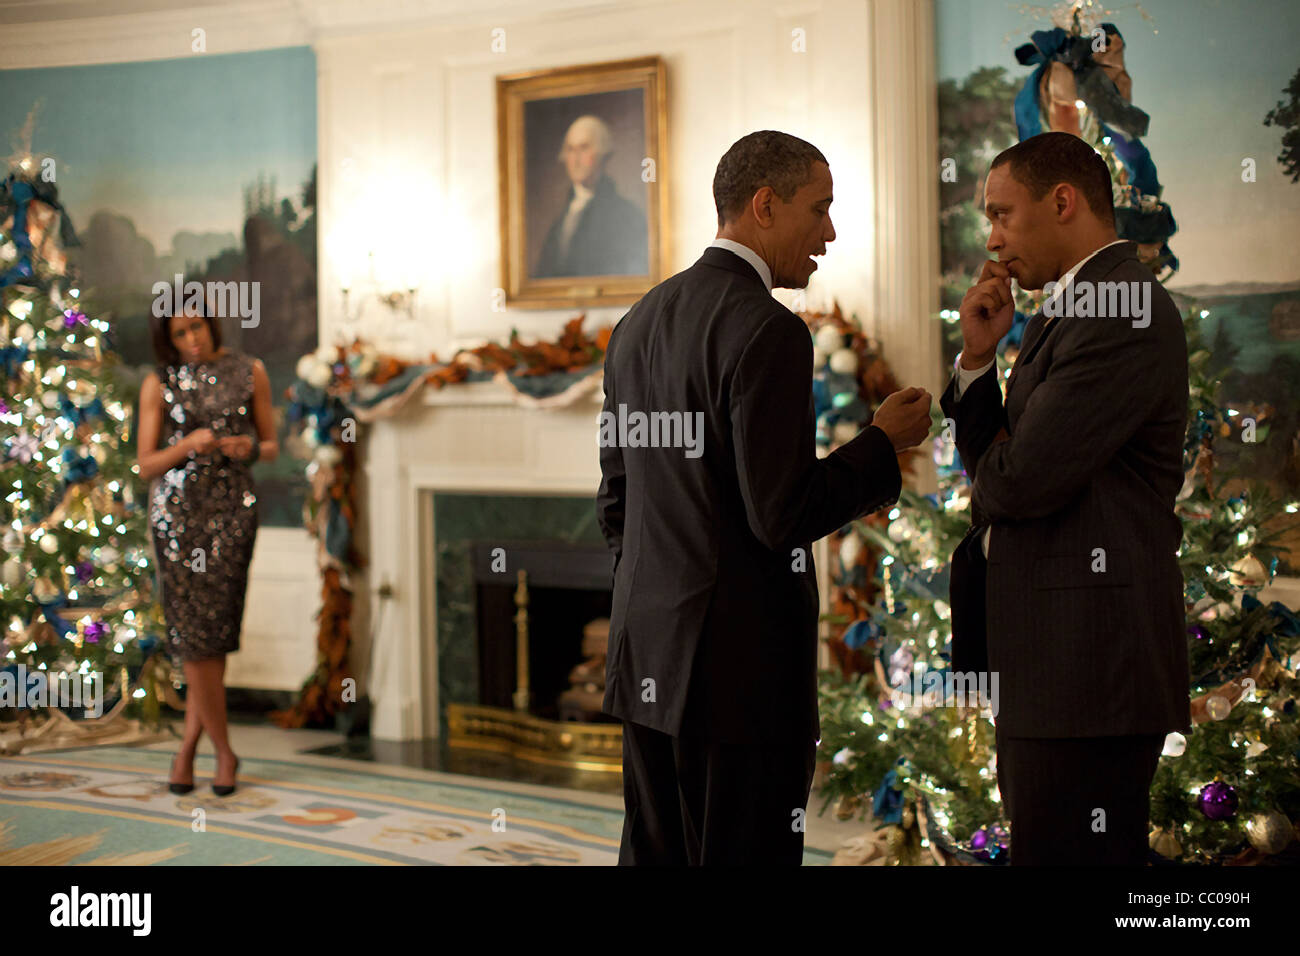 President Barack Obama interrupts the holiday to speak with Rob Nabors, Assistant to the President for Legislative Affairs, about the latest developments in the payroll tax cut extension as the First Lady waits in the background December 15, 2011 in in Washington, DC. Stock Photo